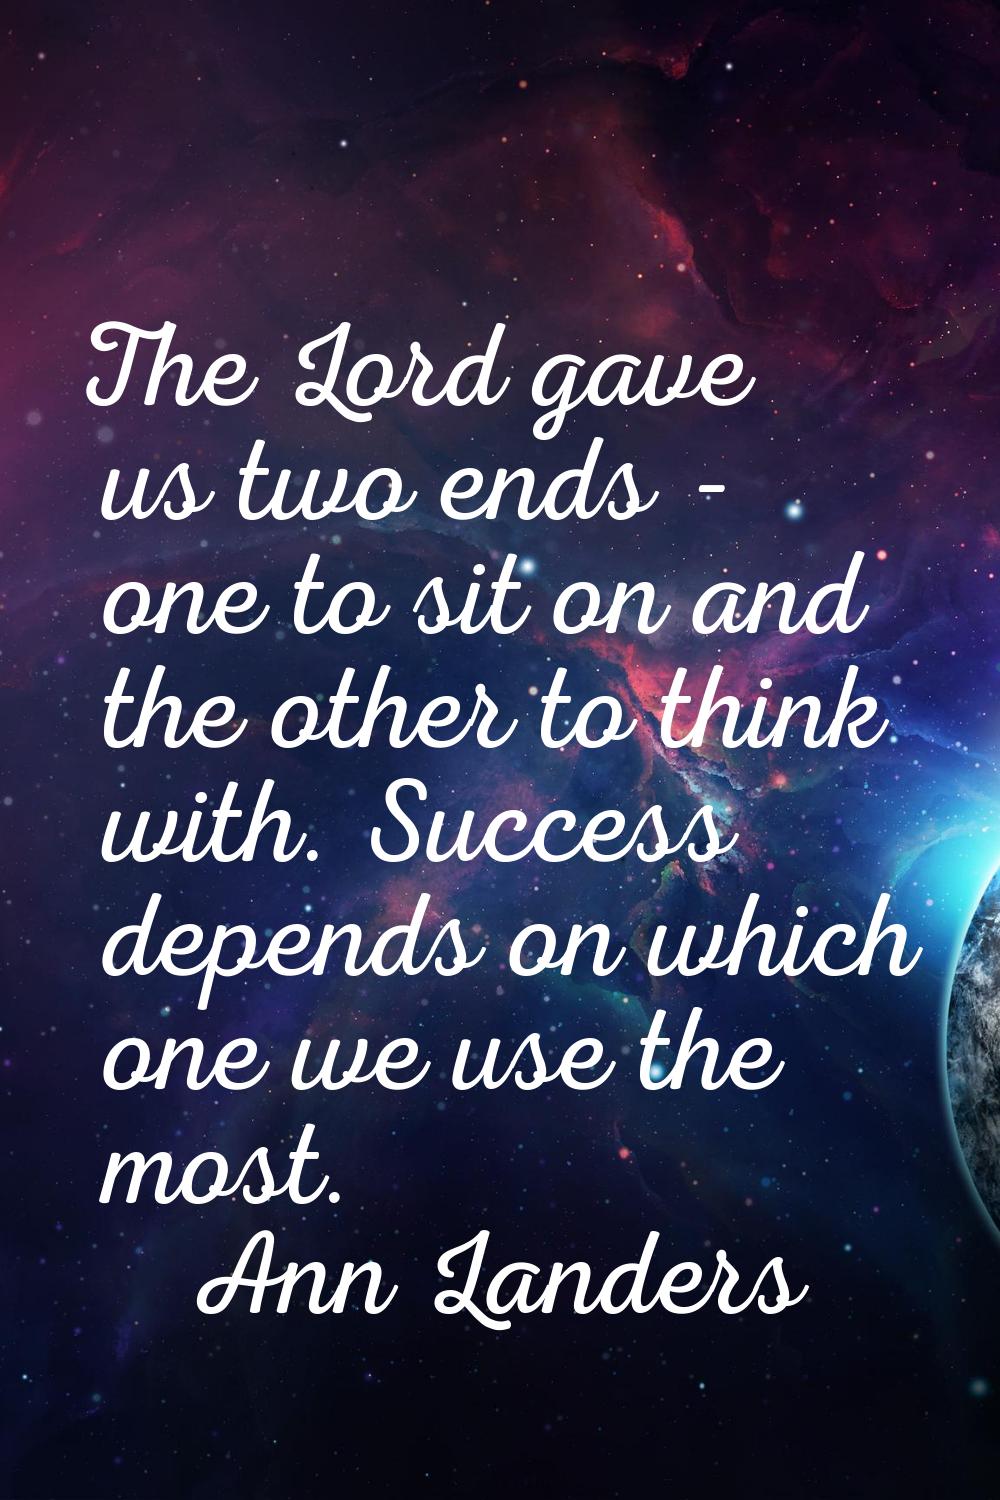 The Lord gave us two ends - one to sit on and the other to think with. Success depends on which one